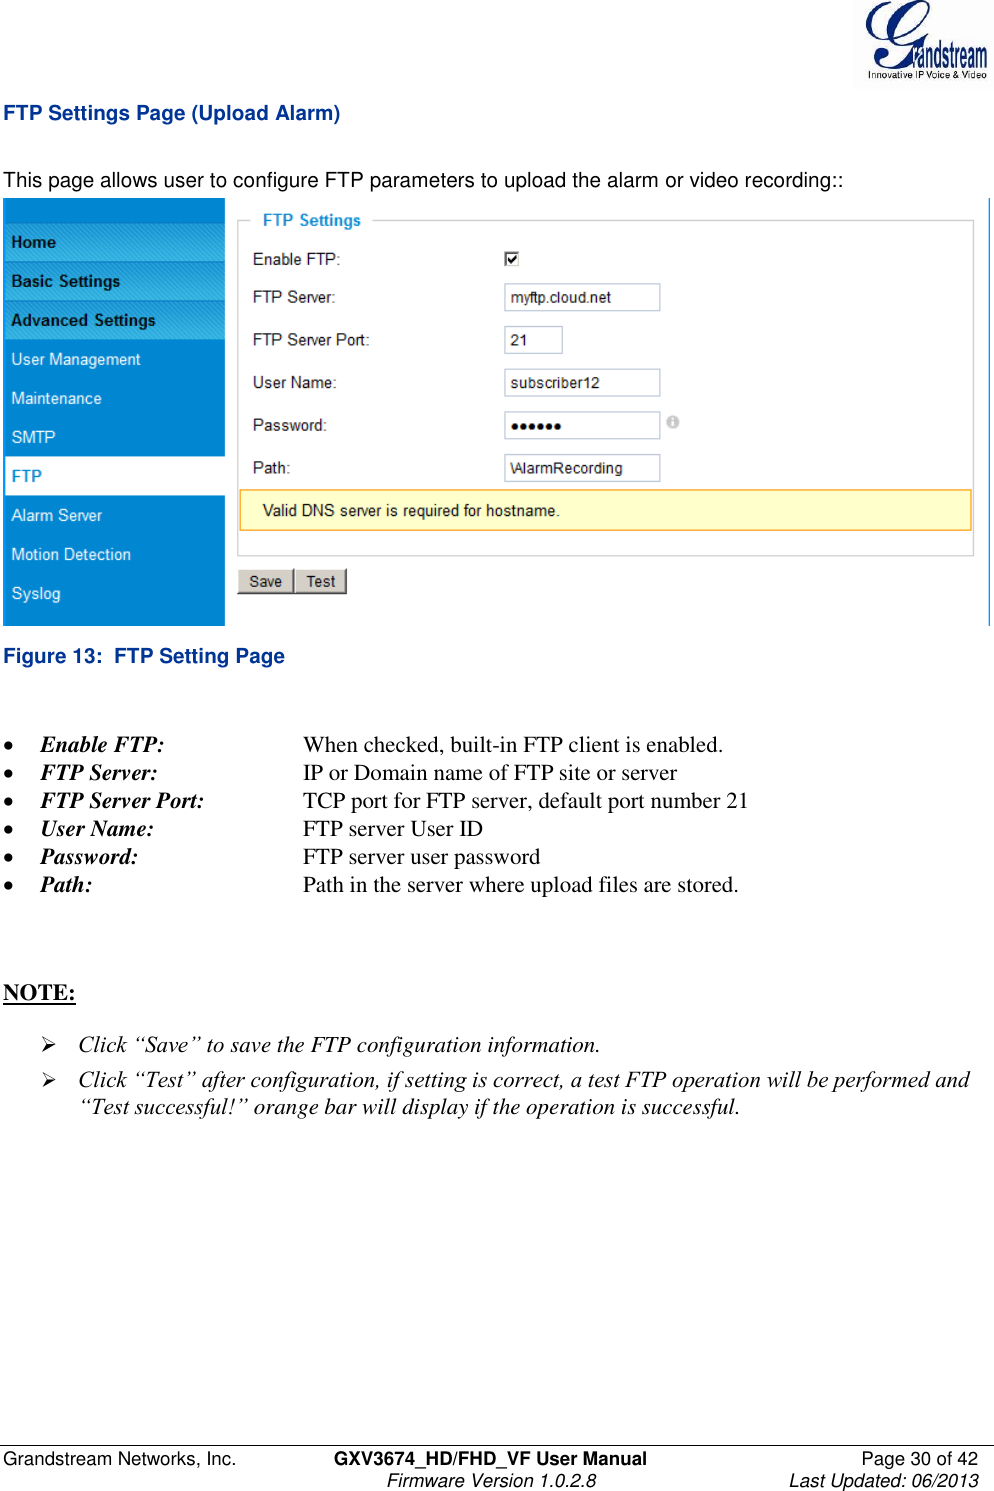  Grandstream Networks, Inc.  GXV3674_HD/FHD_VF User Manual  Page 30 of 42   Firmware Version 1.0.2.8  Last Updated: 06/2013  FTP Settings Page (Upload Alarm)  This page allows user to configure FTP parameters to upload the alarm or video recording::  Figure 13:  FTP Setting Page   Enable FTP:    When checked, built-in FTP client is enabled.   FTP Server:    IP or Domain name of FTP site or server  FTP Server Port:    TCP port for FTP server, default port number 21  User Name:    FTP server User ID  Password:      FTP server user password  Path:      Path in the server where upload files are stored.     NOTE:    Click “Save” to save the FTP configuration information.  Click “Test” after configuration, if setting is correct, a test FTP operation will be performed and “Test successful!” orange bar will display if the operation is successful.  